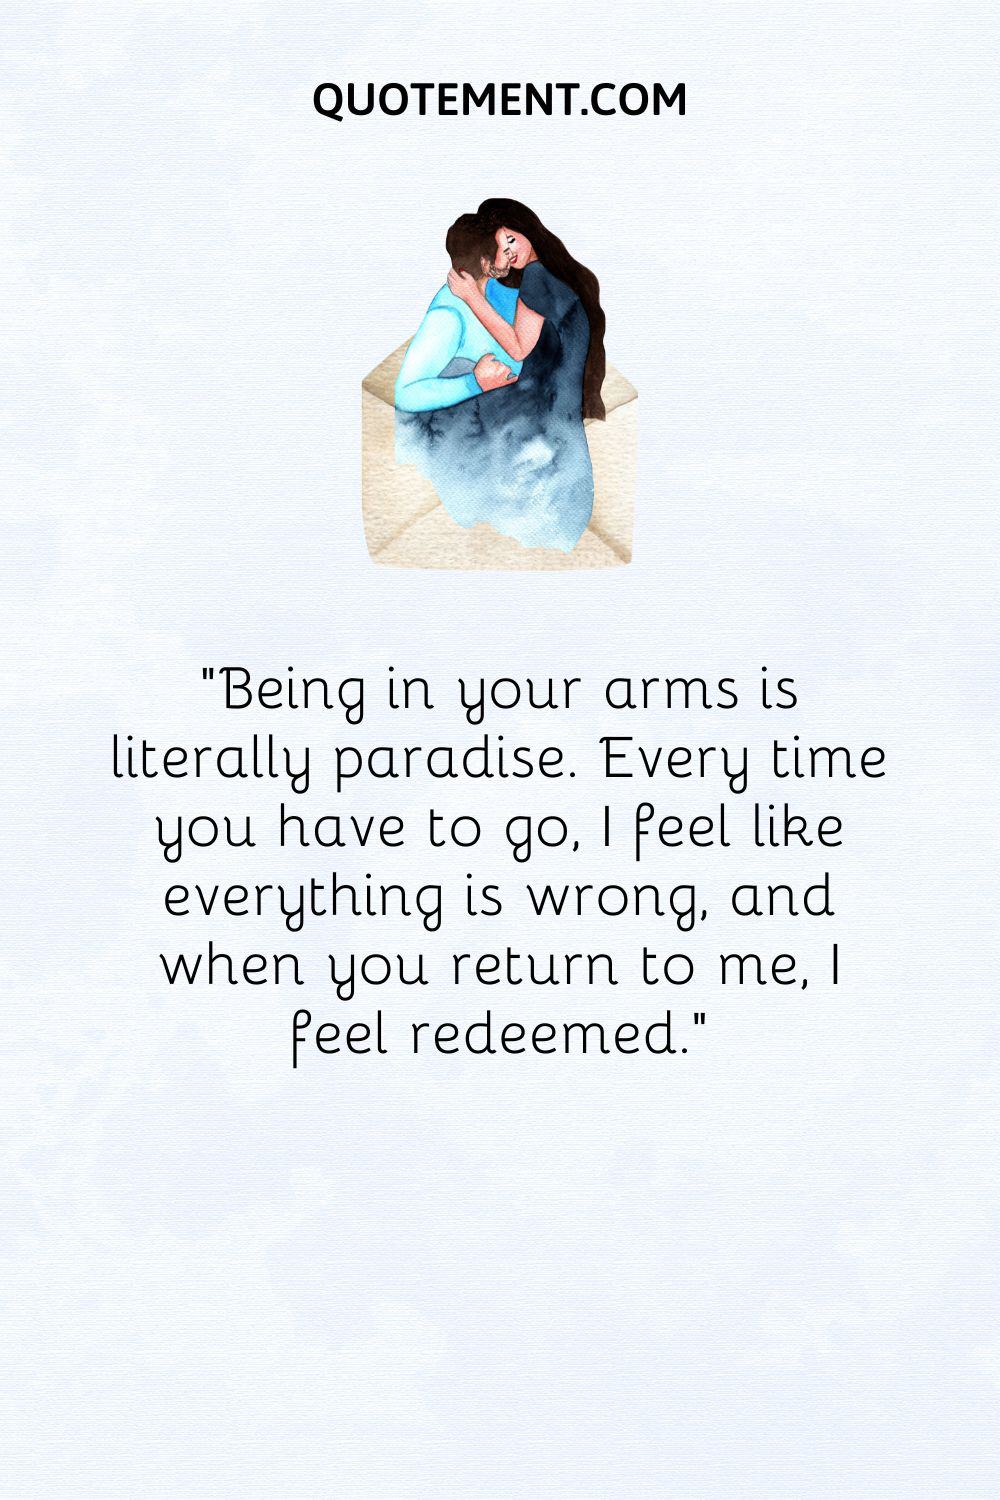 “Being in your arms is literally paradise. Every time you have to go, I feel like everything is wrong, and when you return to me, I feel redeemed.”